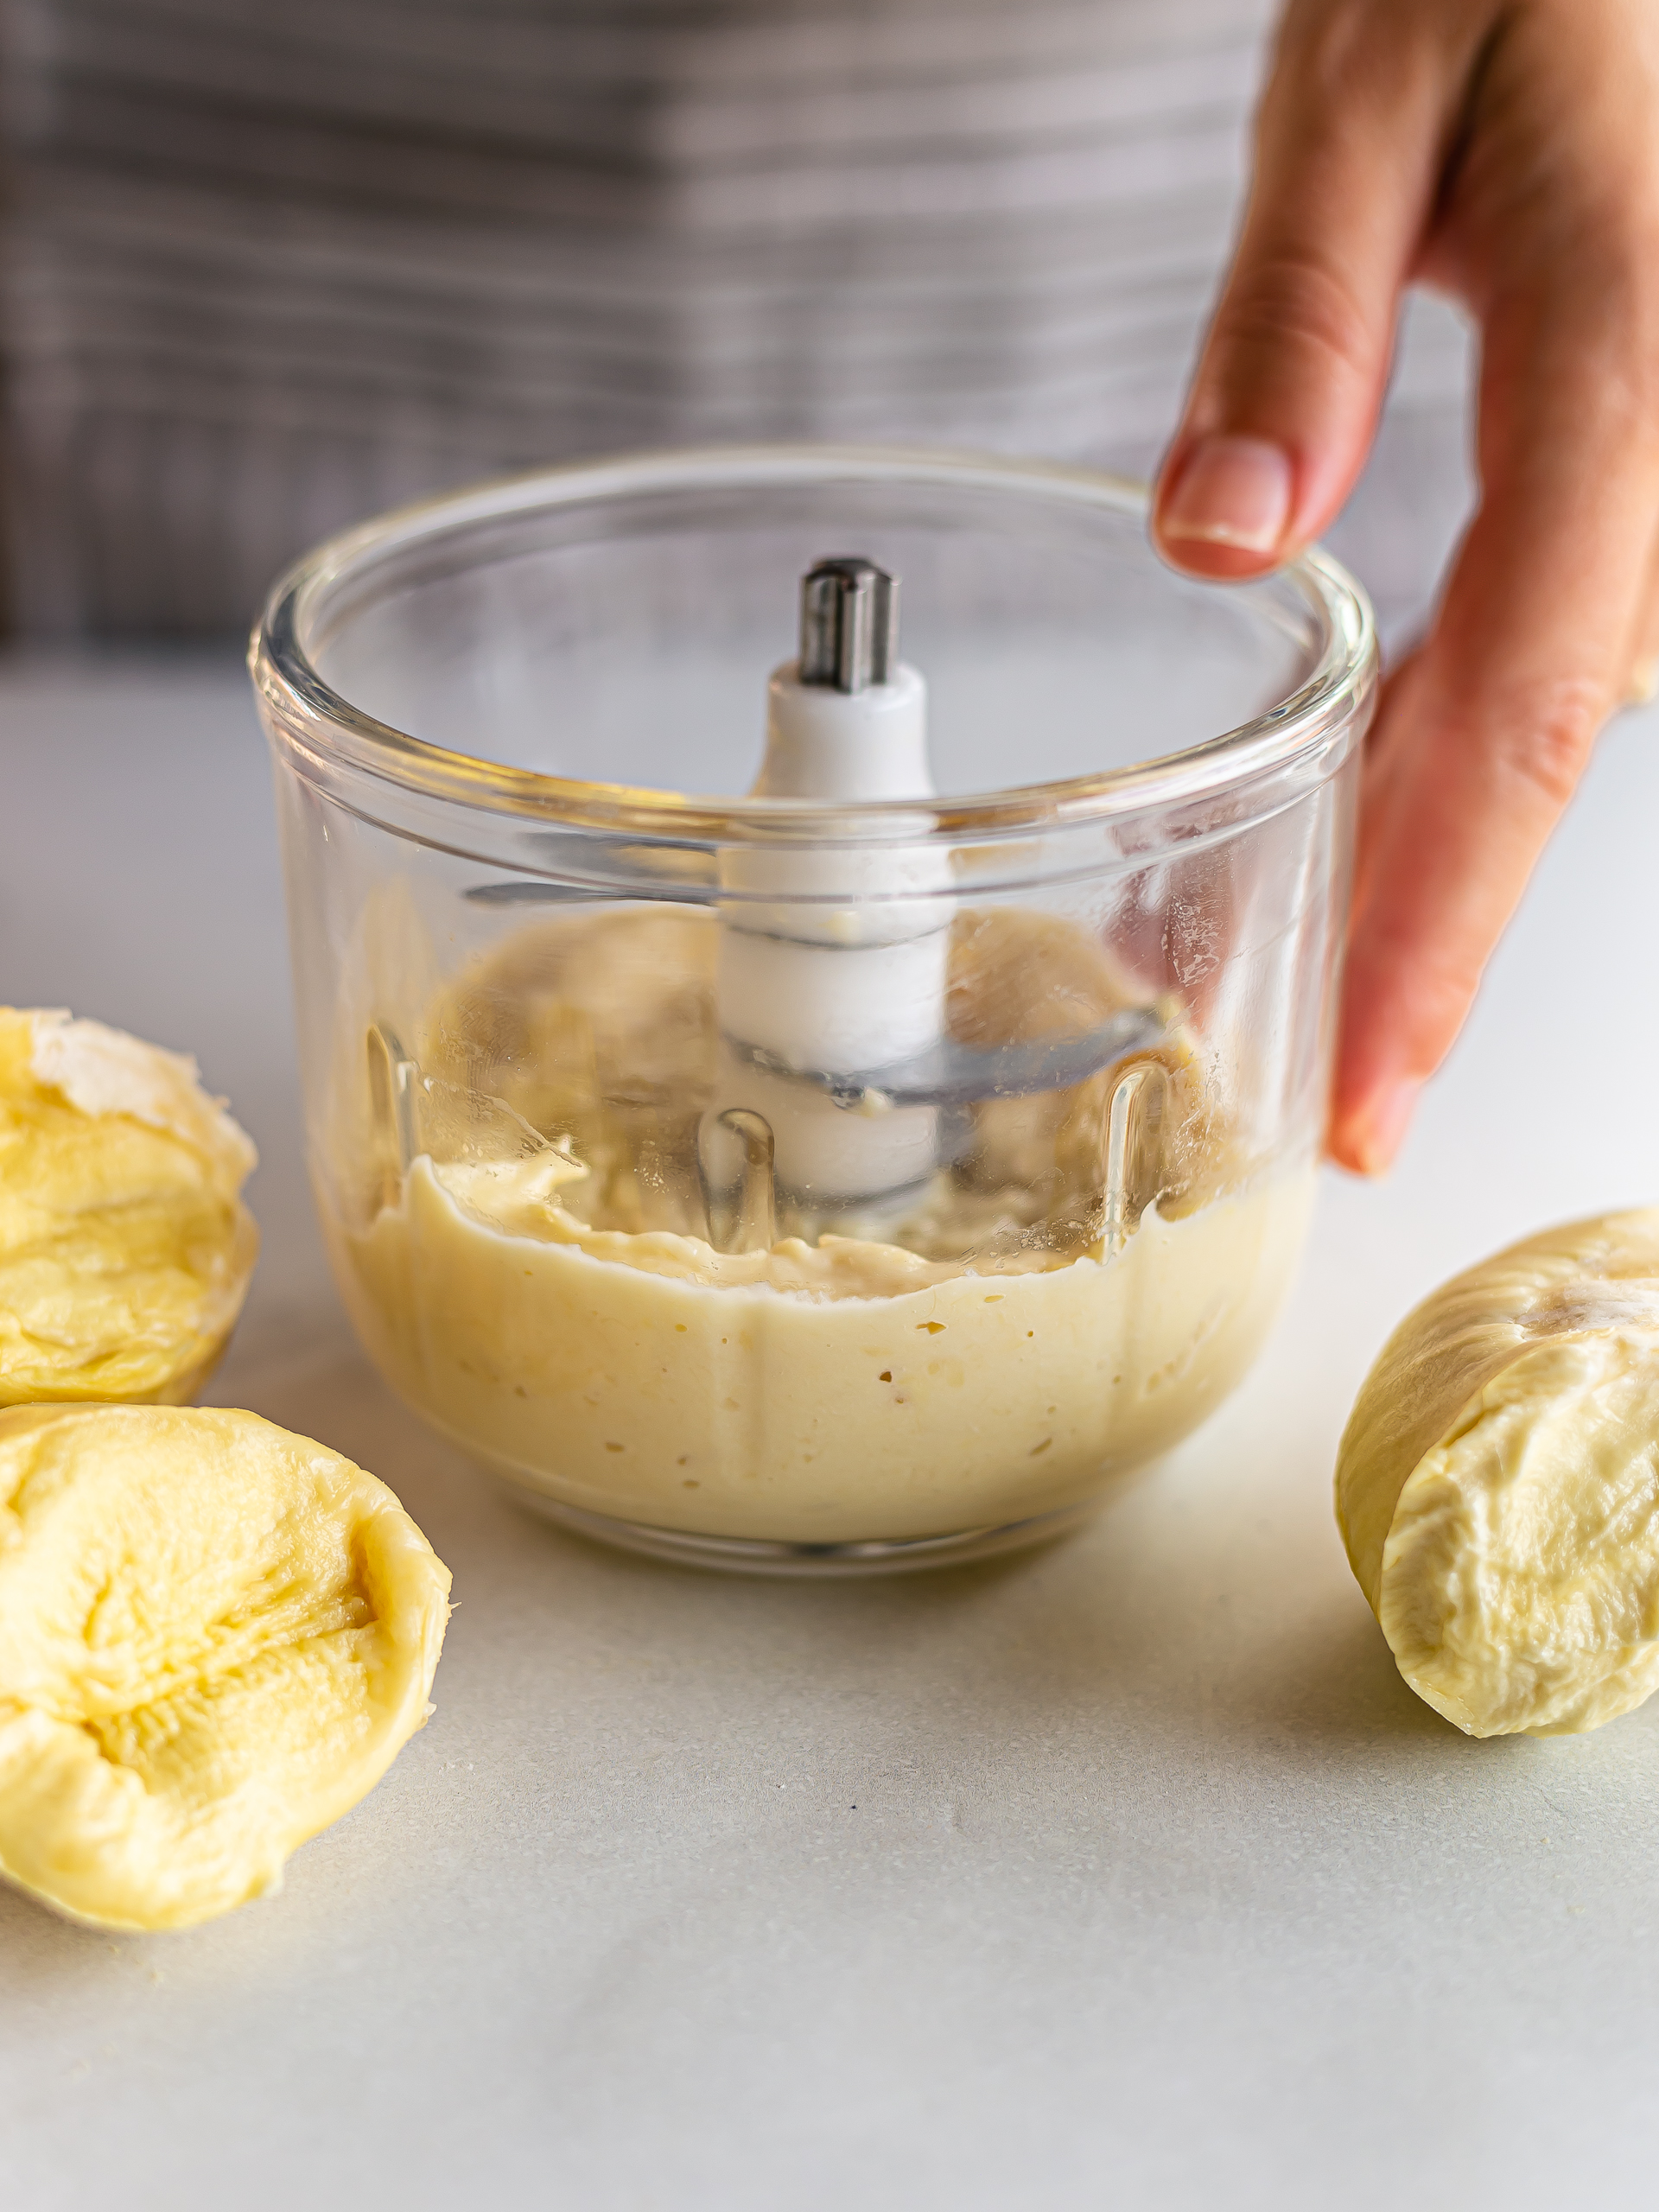 durian puree in a blender